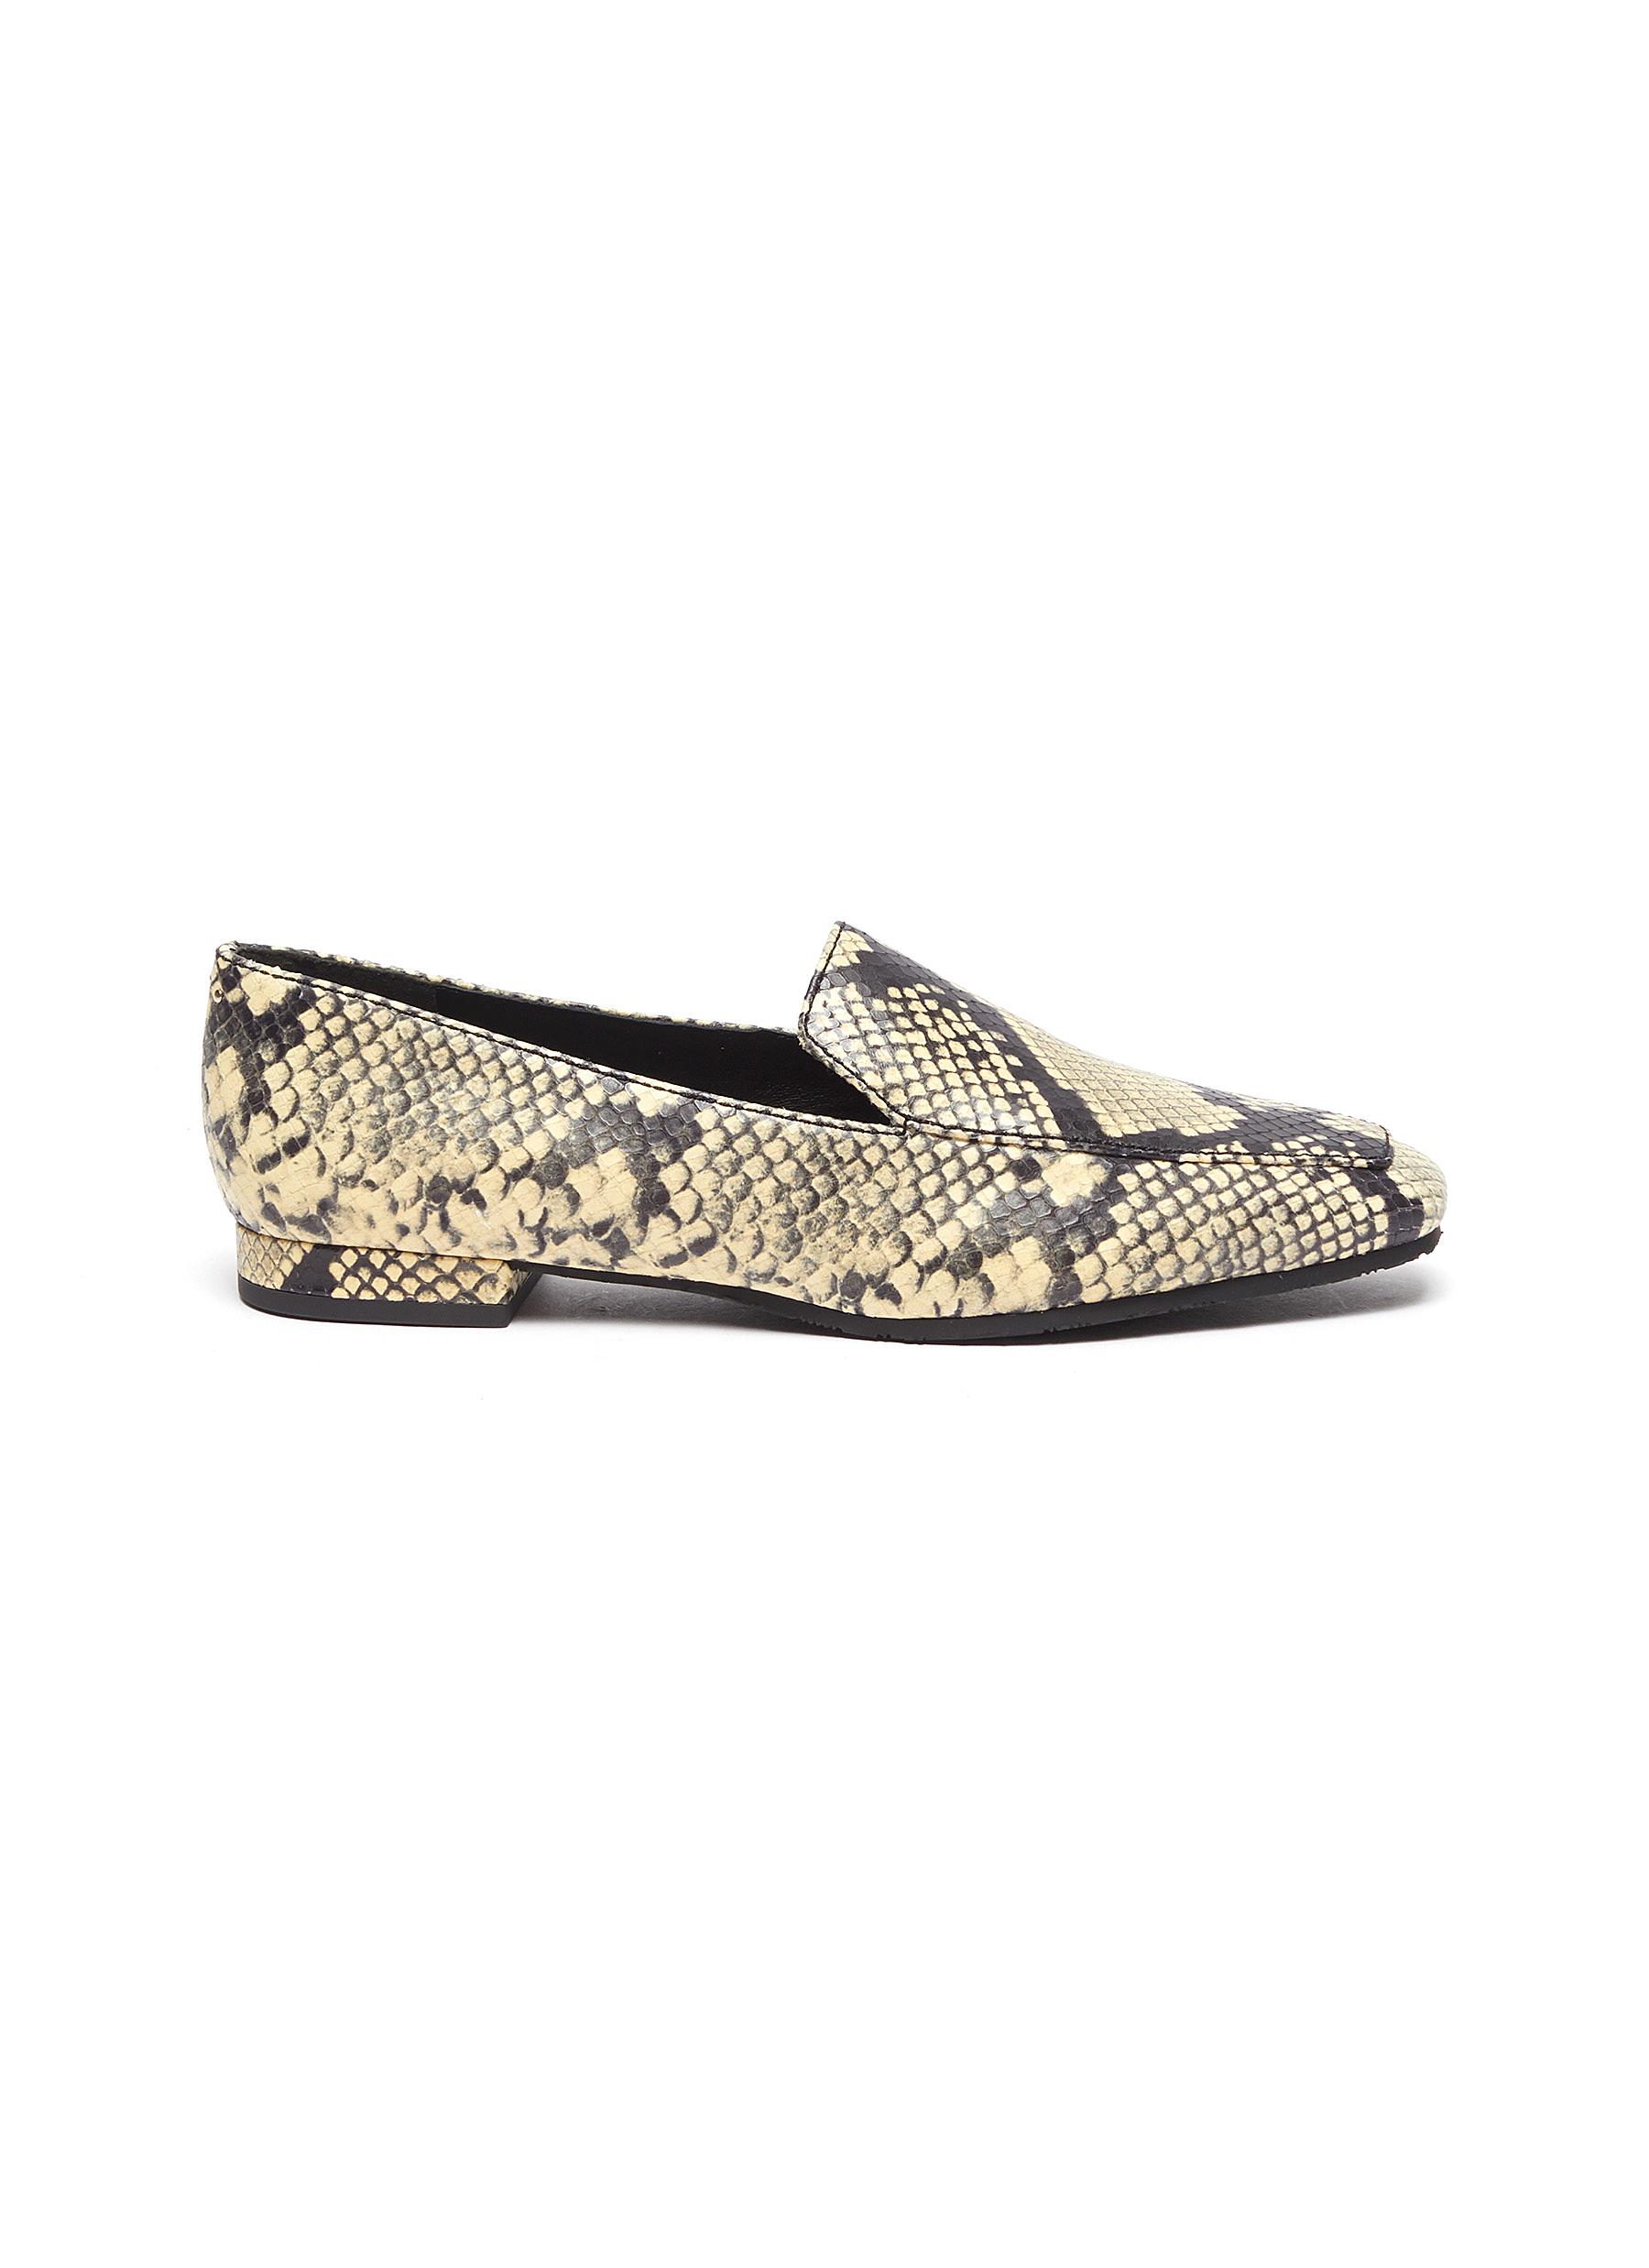 Lenny snake embossed leather loafers by Stella Luna